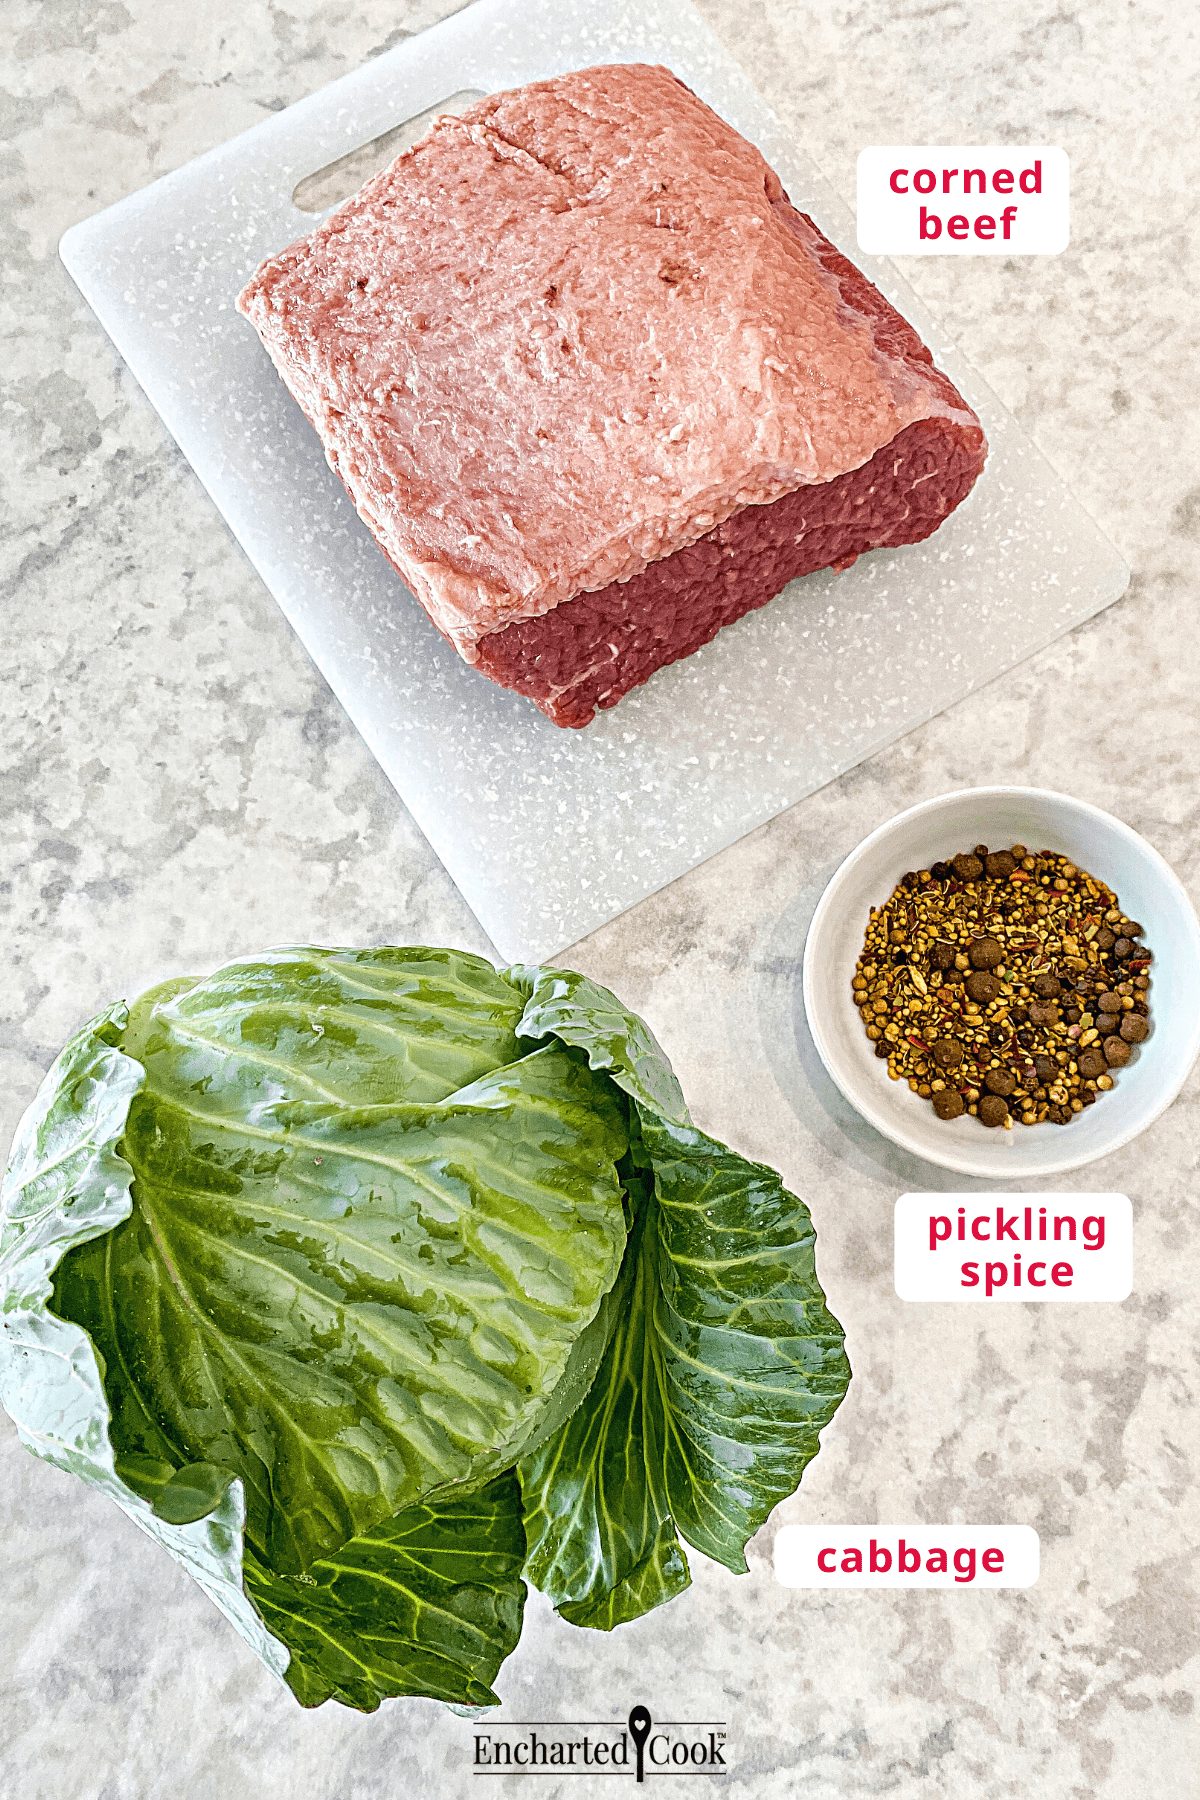 The ingredients, from top to bottom: uncooked corned beef, pickling spice, and fresh green cabbage.